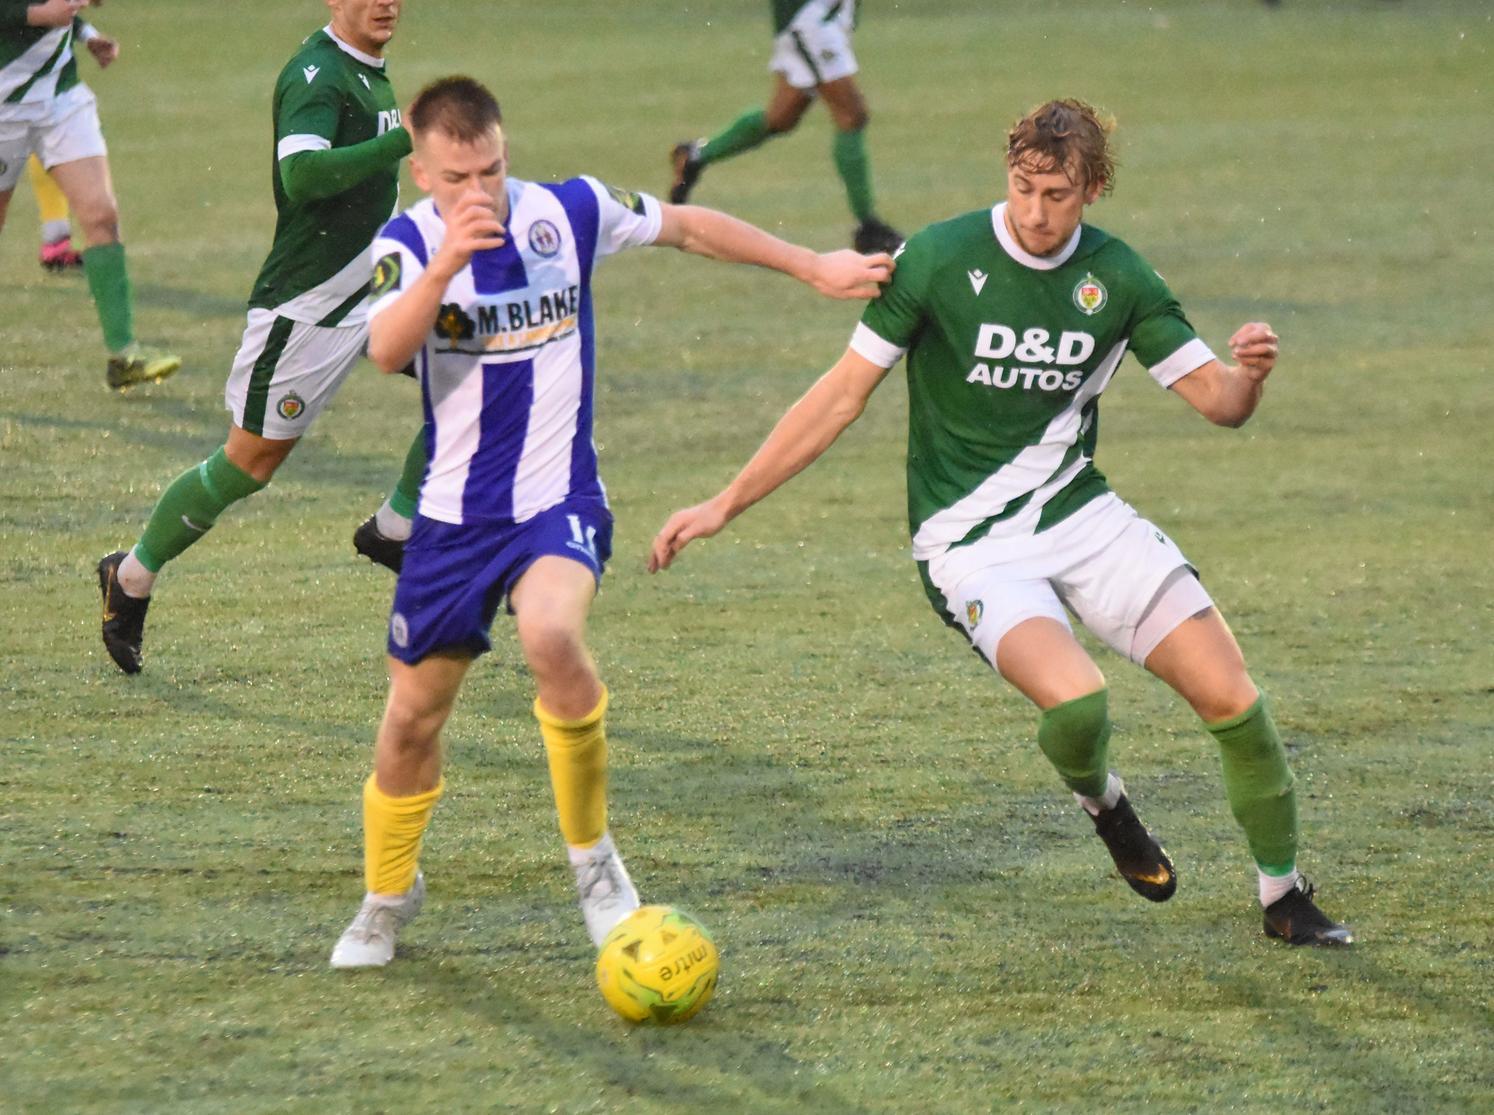 Keiran Rowe pokes the ball away from a defender